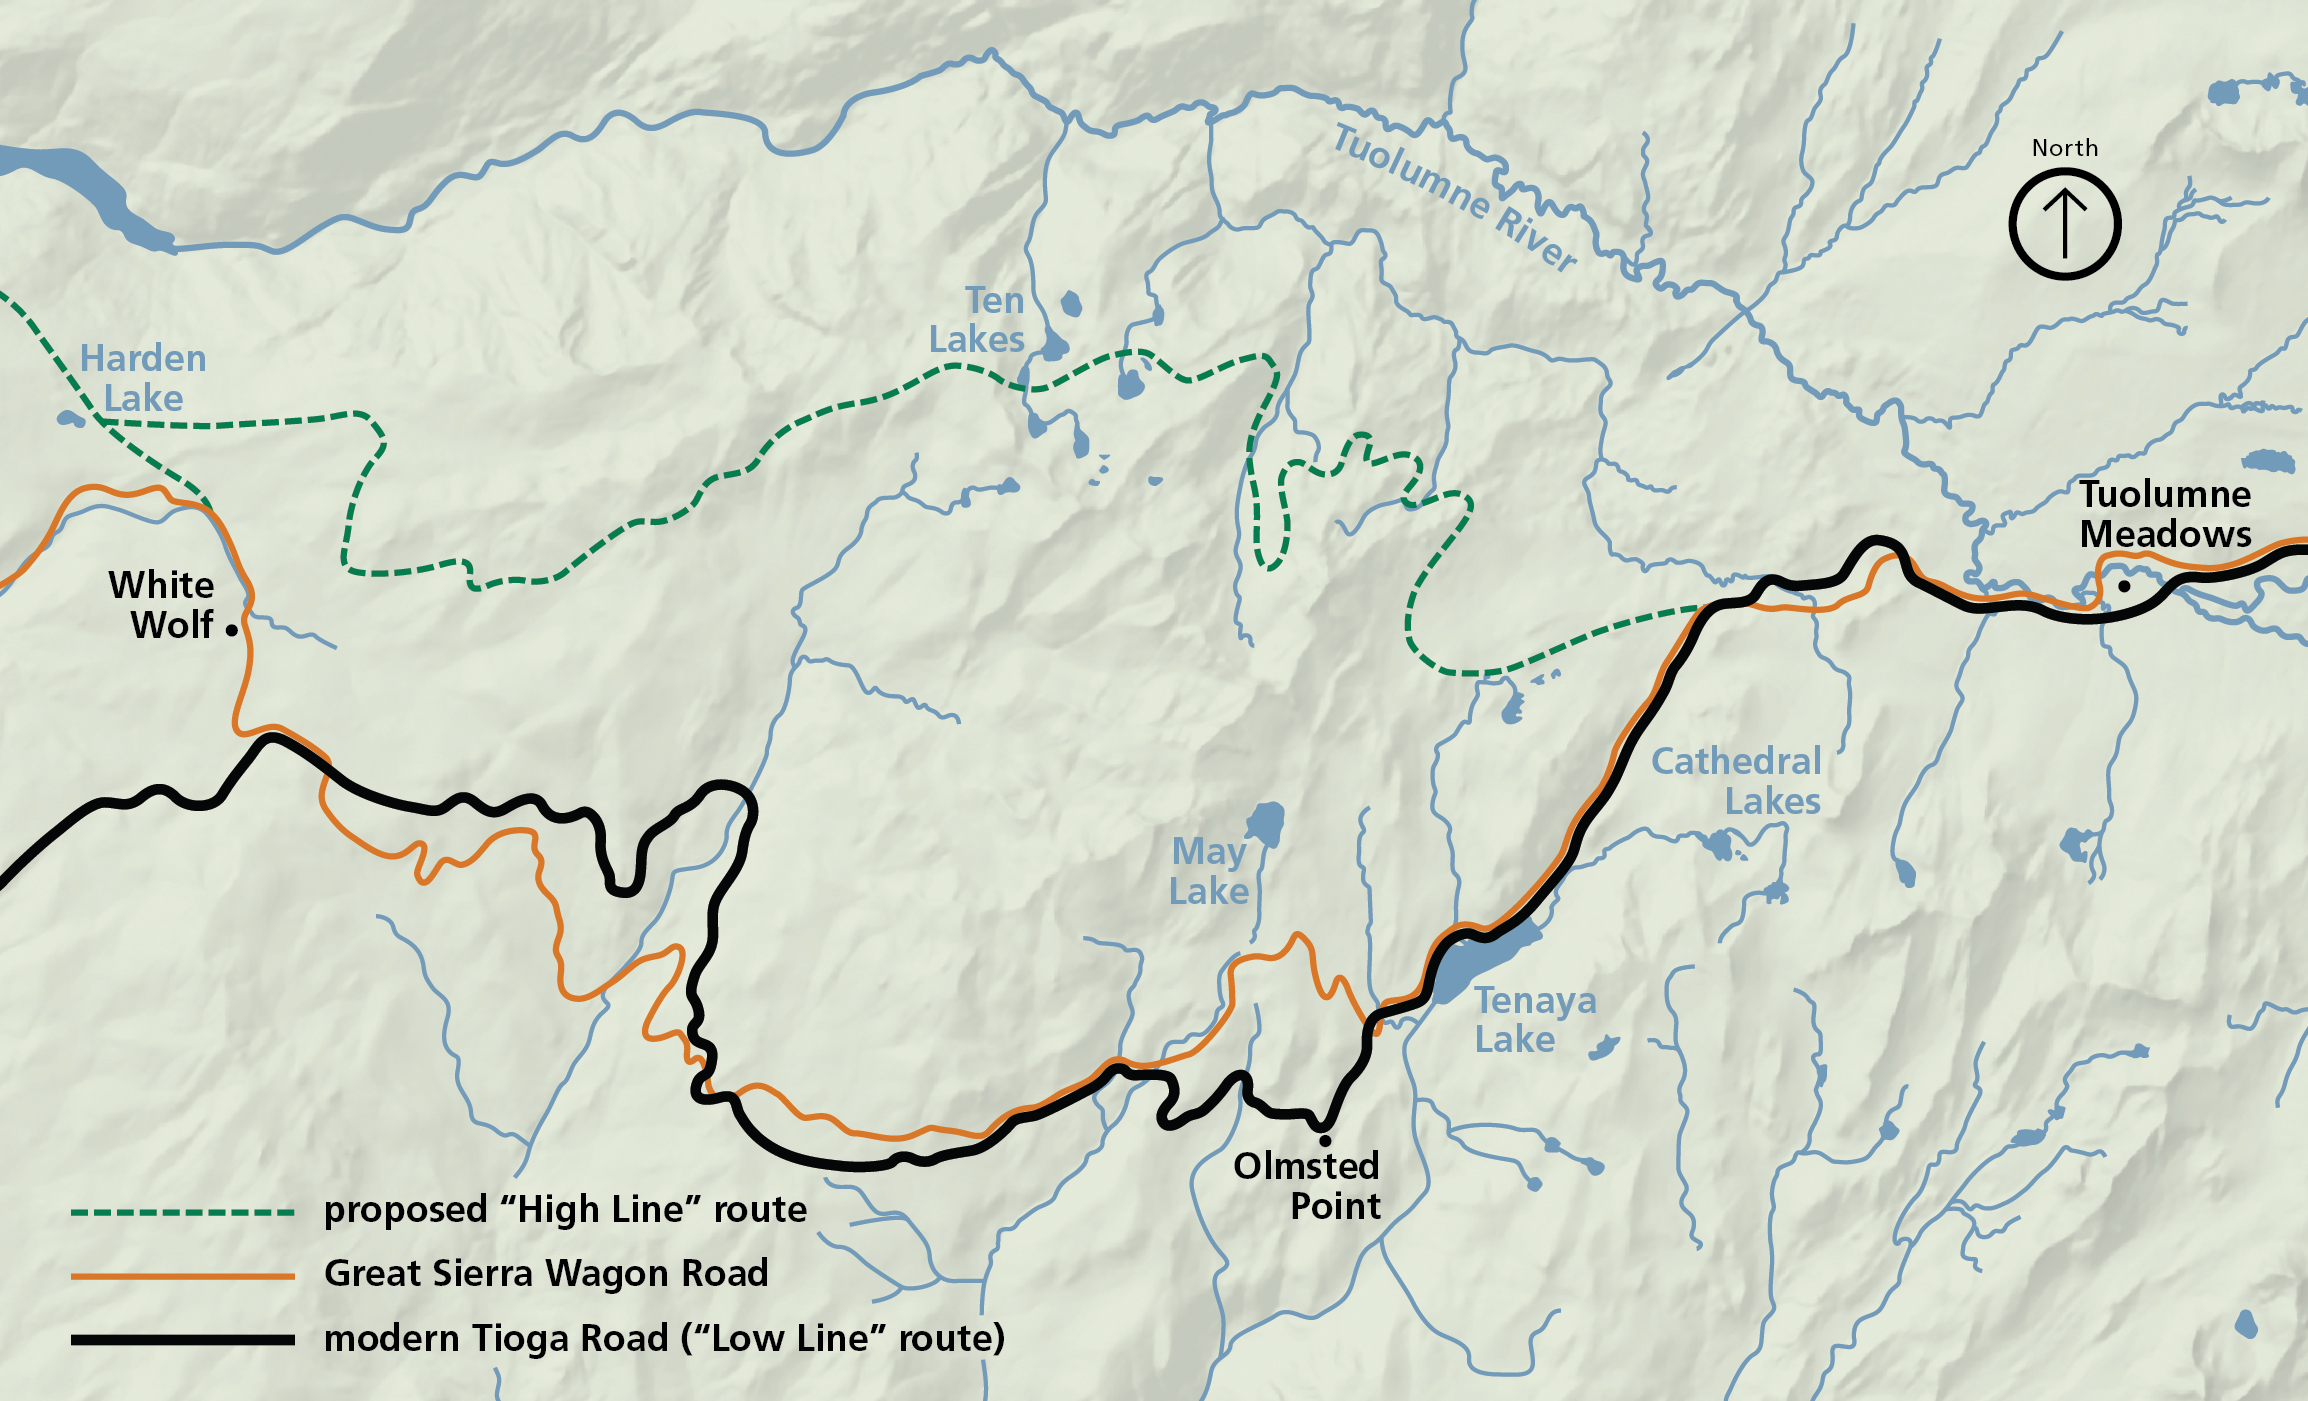 An illustrated map shows several routes through the Yosemite high country